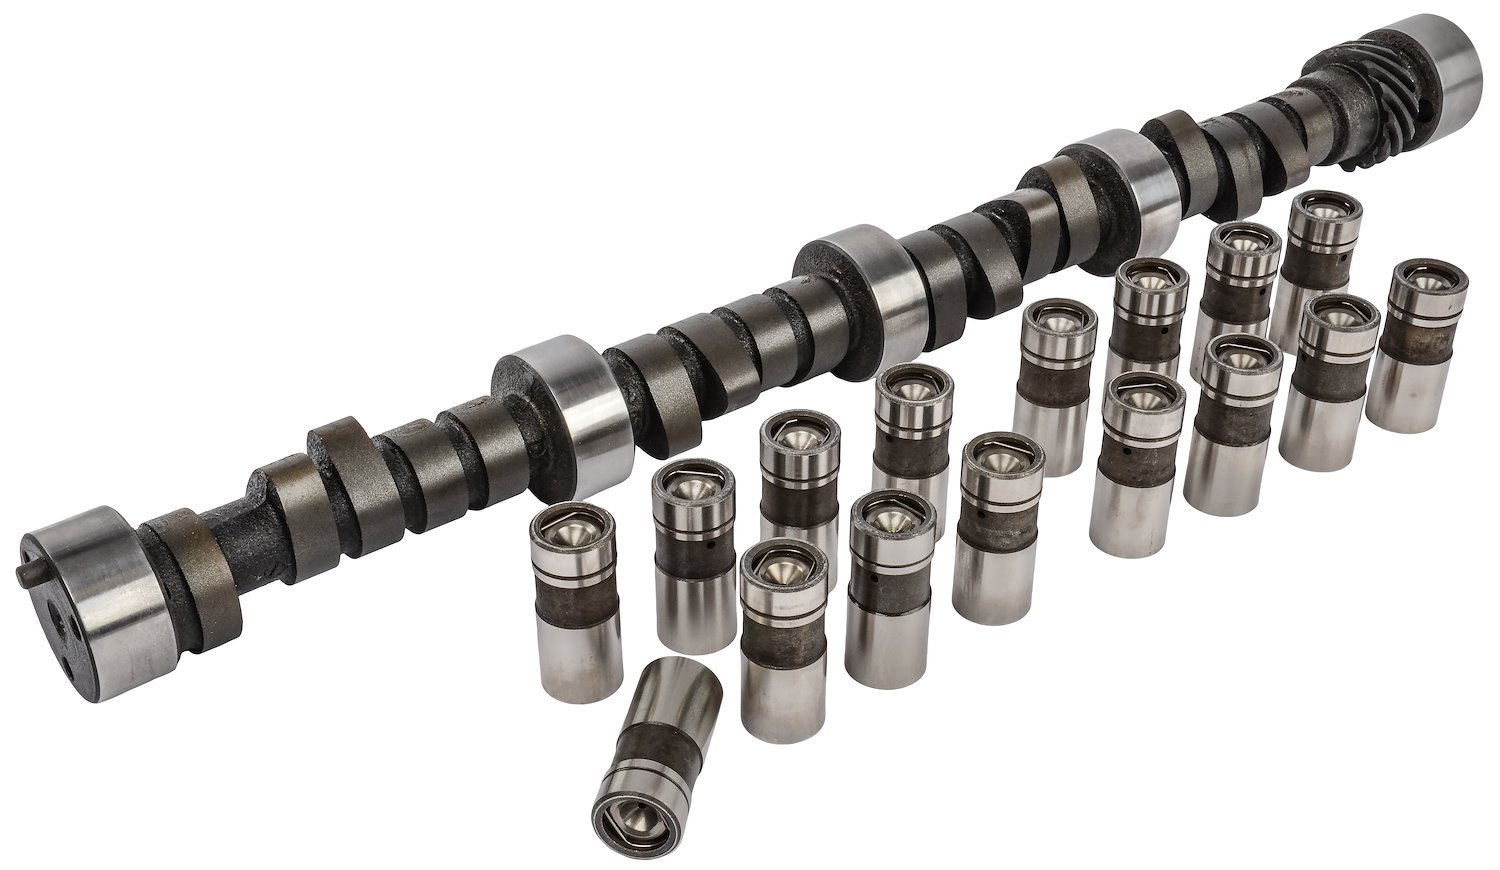 JEGS 200108: Hydraulic Flat Tappet Camshaft & Lifters for 1957-1985 Chevy  262-400 - JEGS High Performance